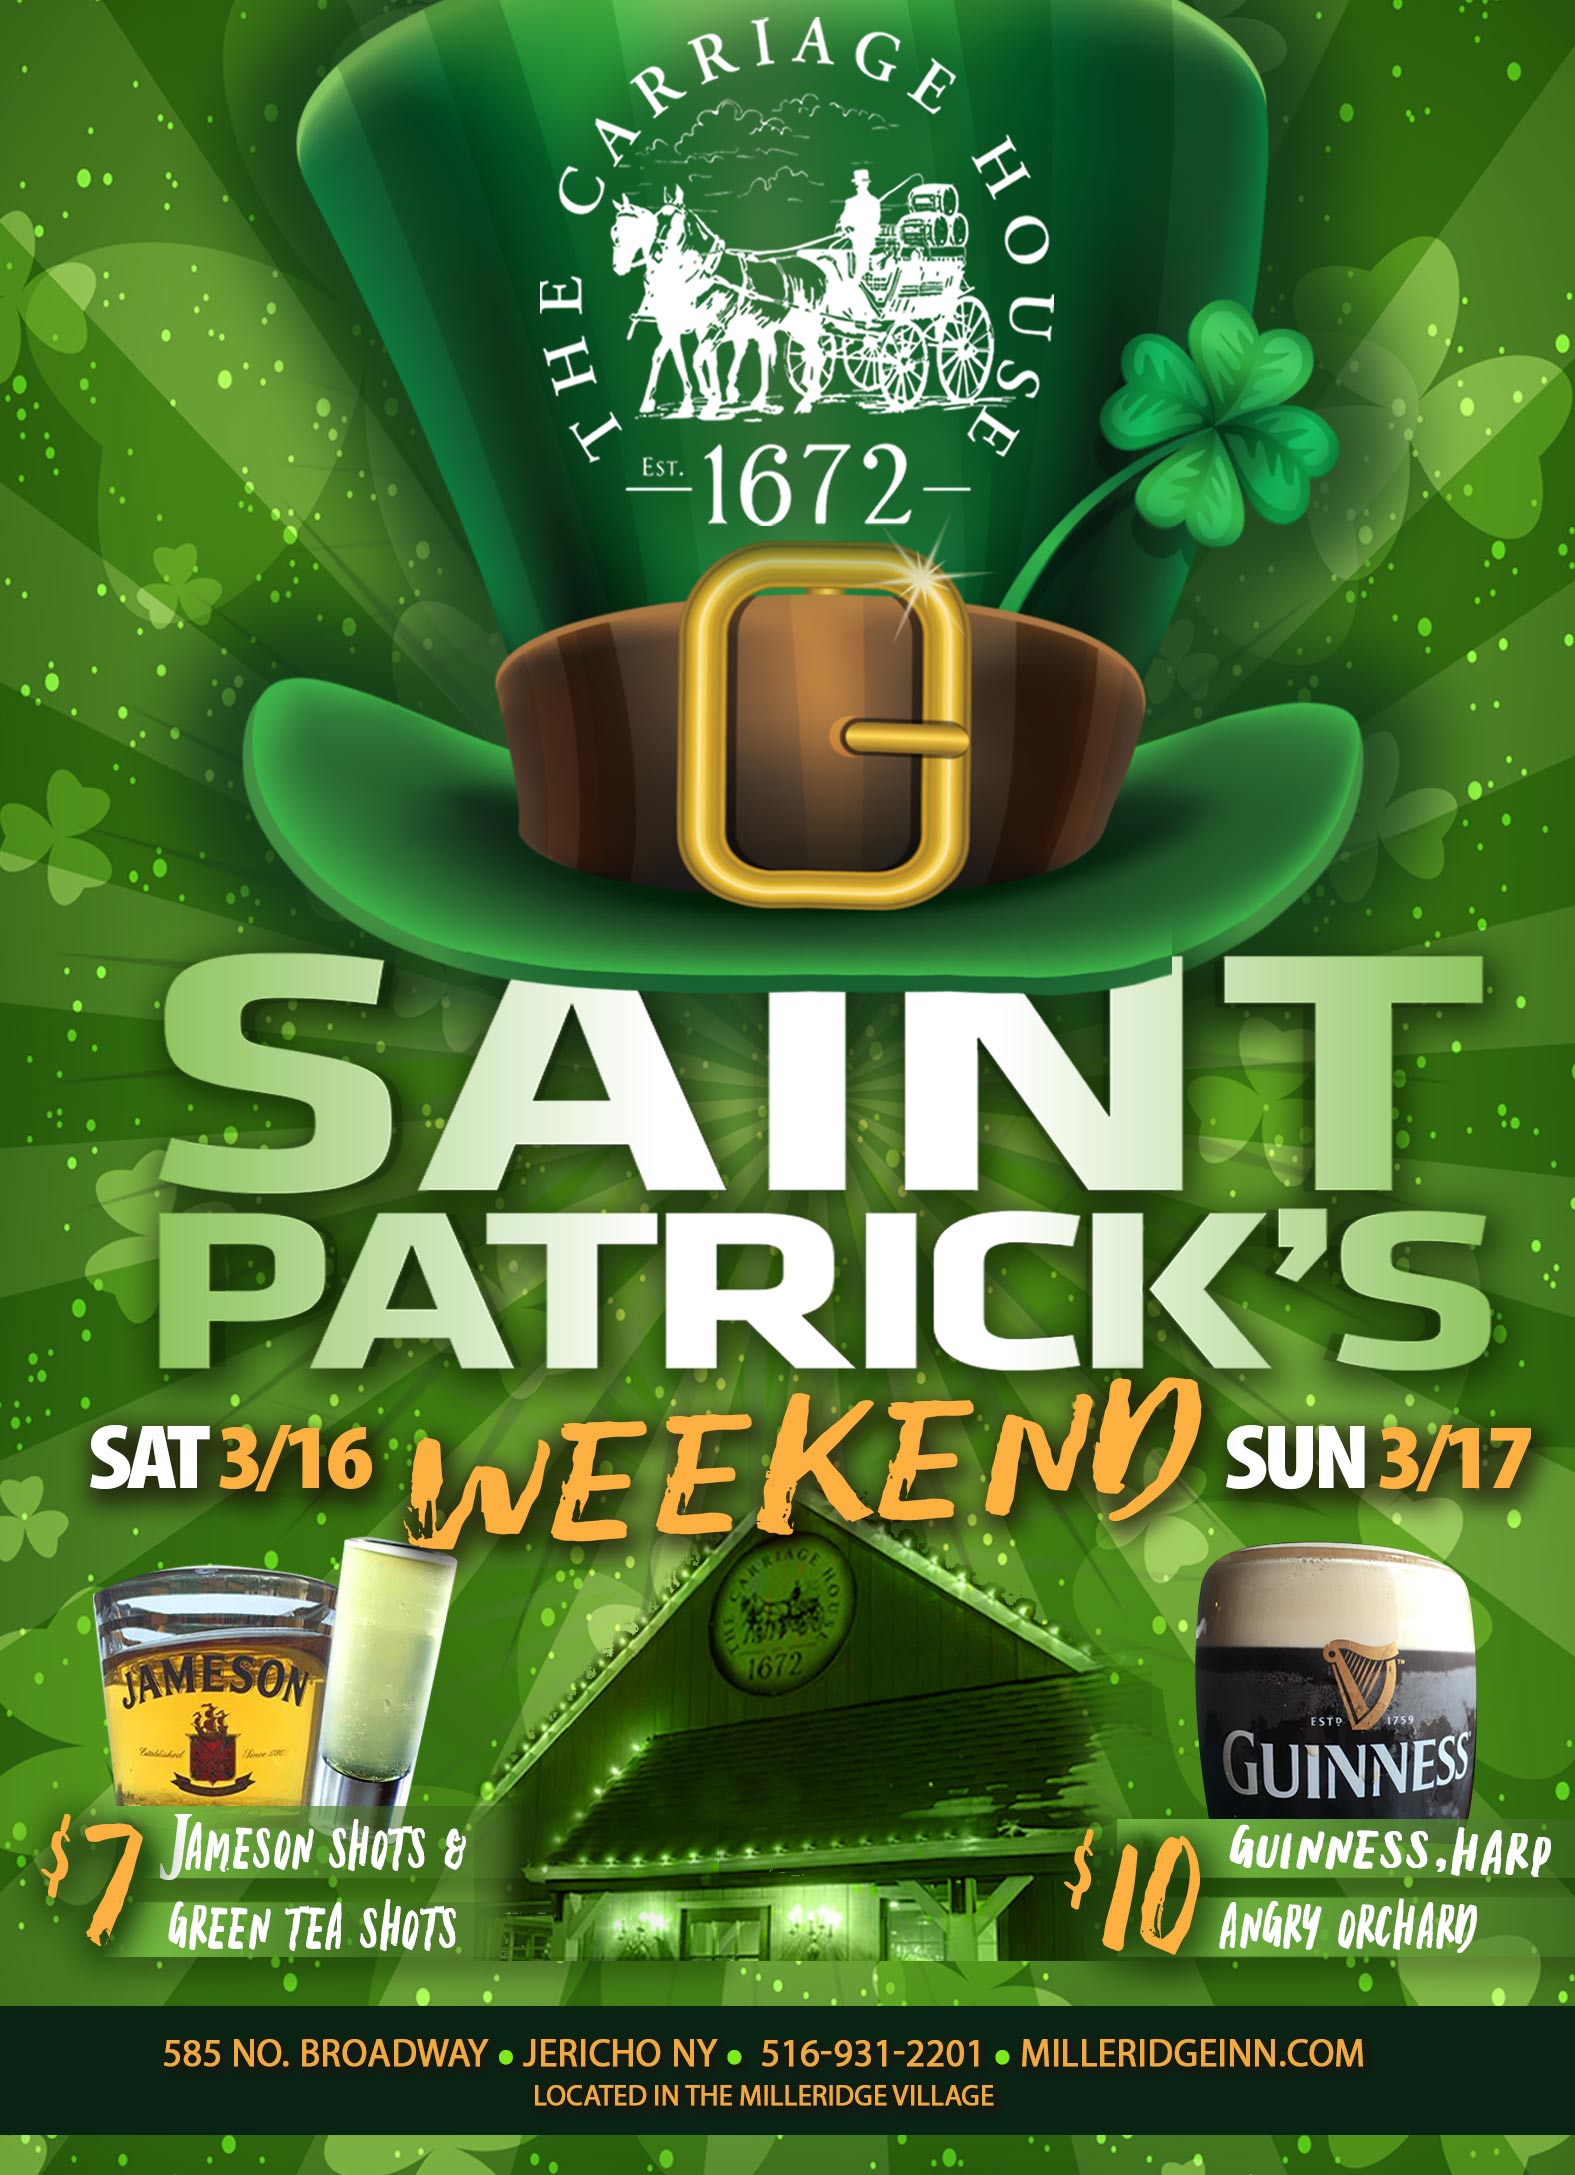 St. Patricks Day Weekend at the Carriage House